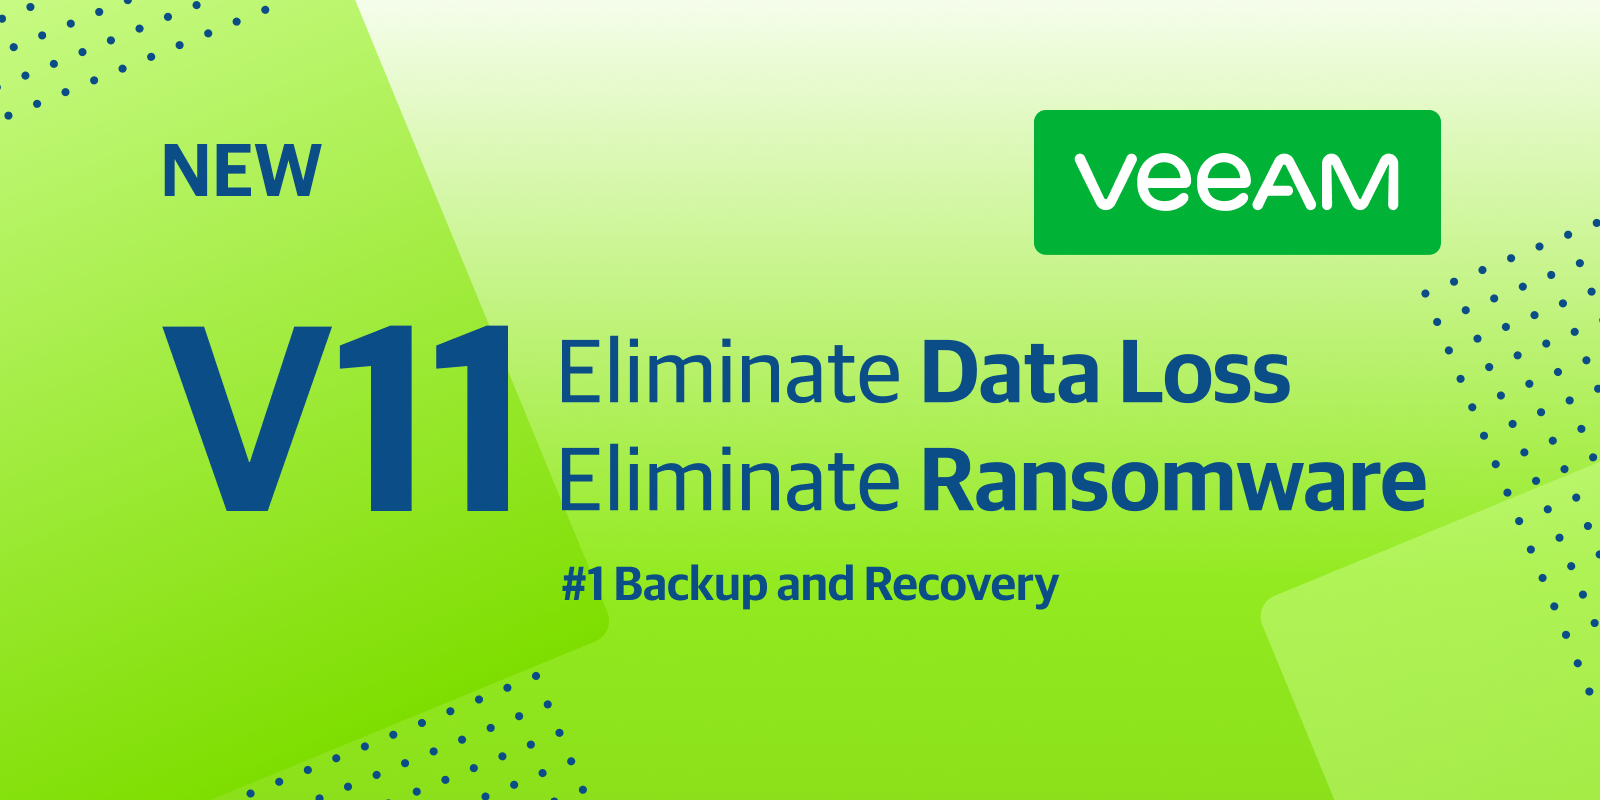 veeam ransomware protection